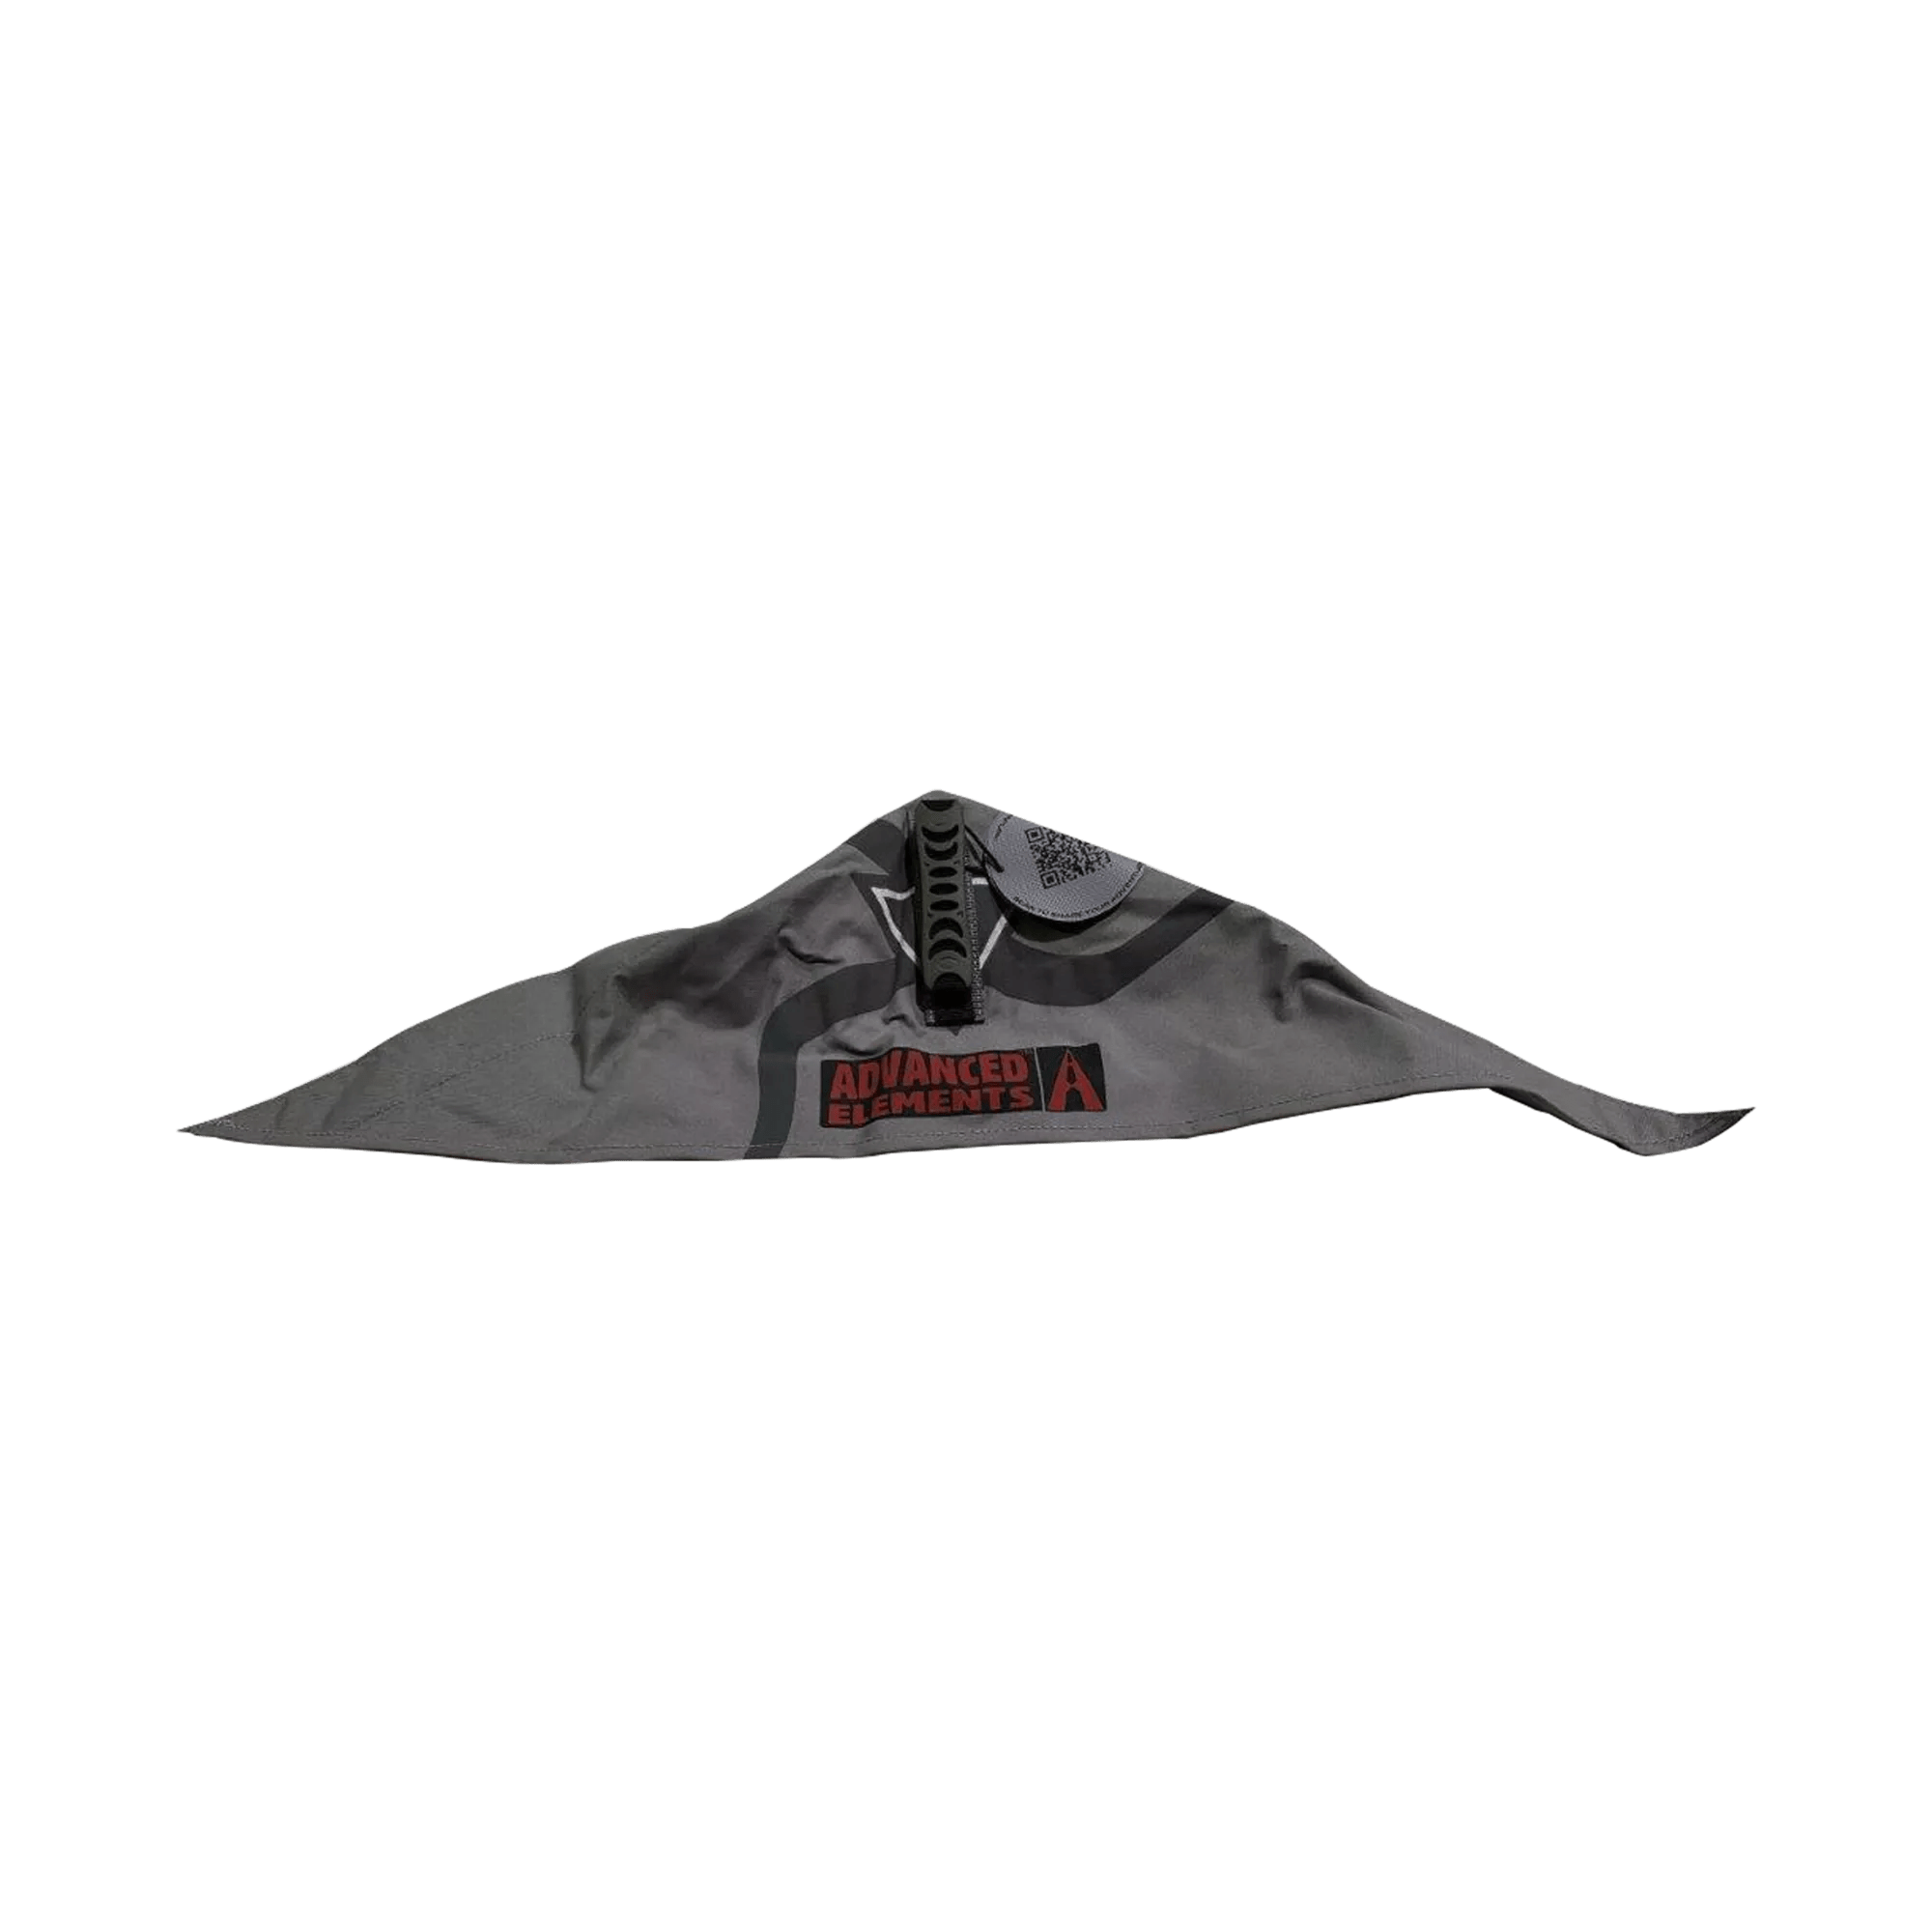 ADVANCED ELEMENTS - Bow/Stern Nose Cover - StraitEdge™ -  - AESE-BSNCRH - 